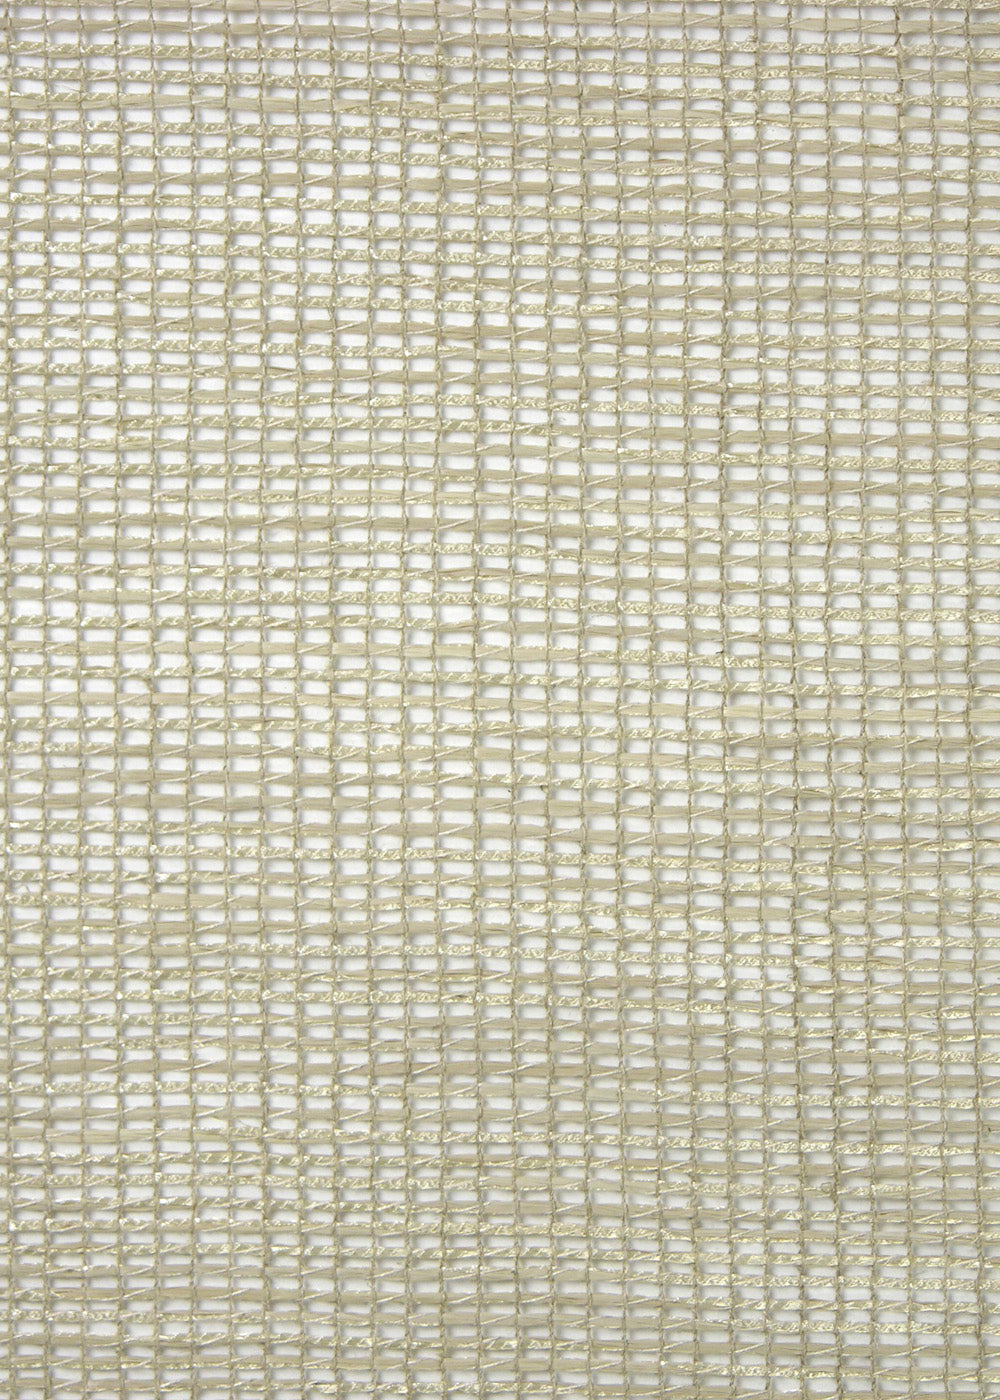 oatmeal fabric with an open rectangular weave